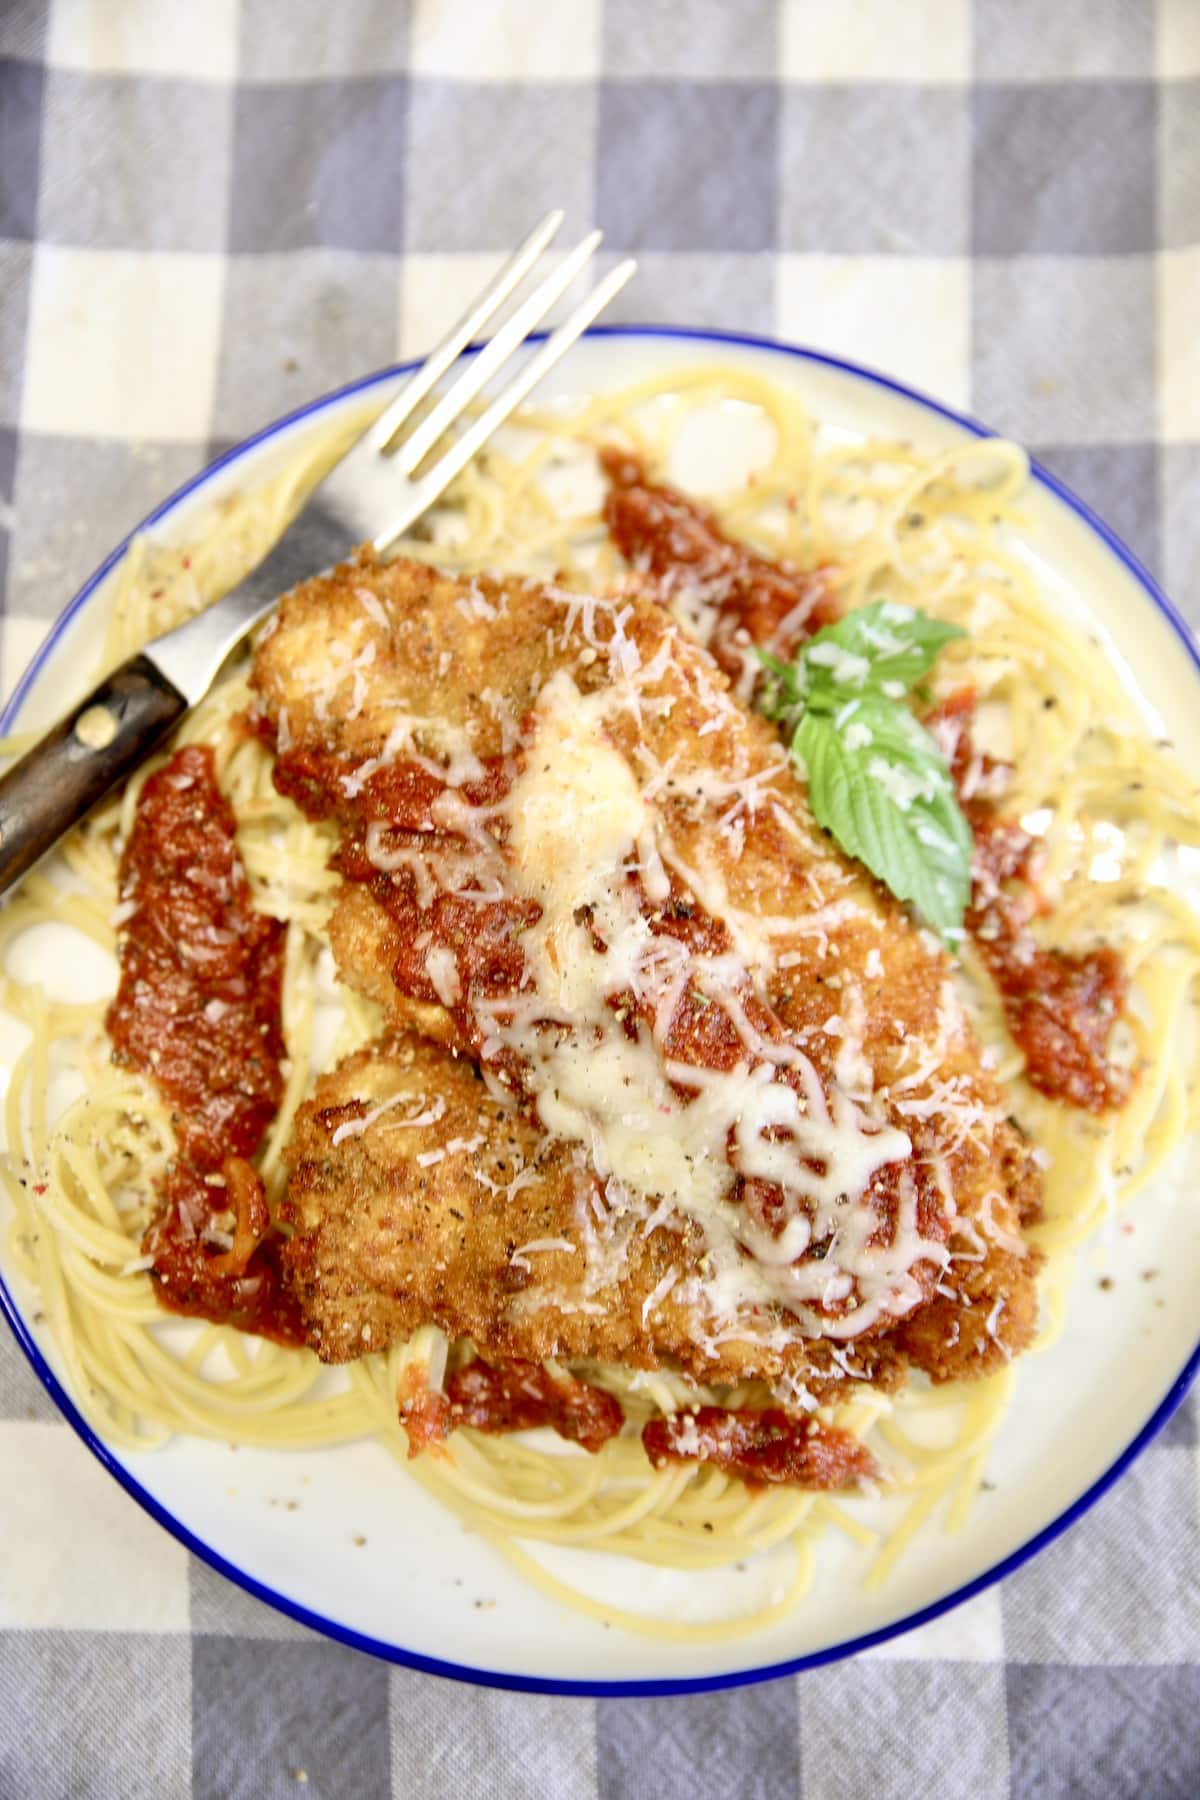 Chicken Parmesan on a plate with spaghetti.